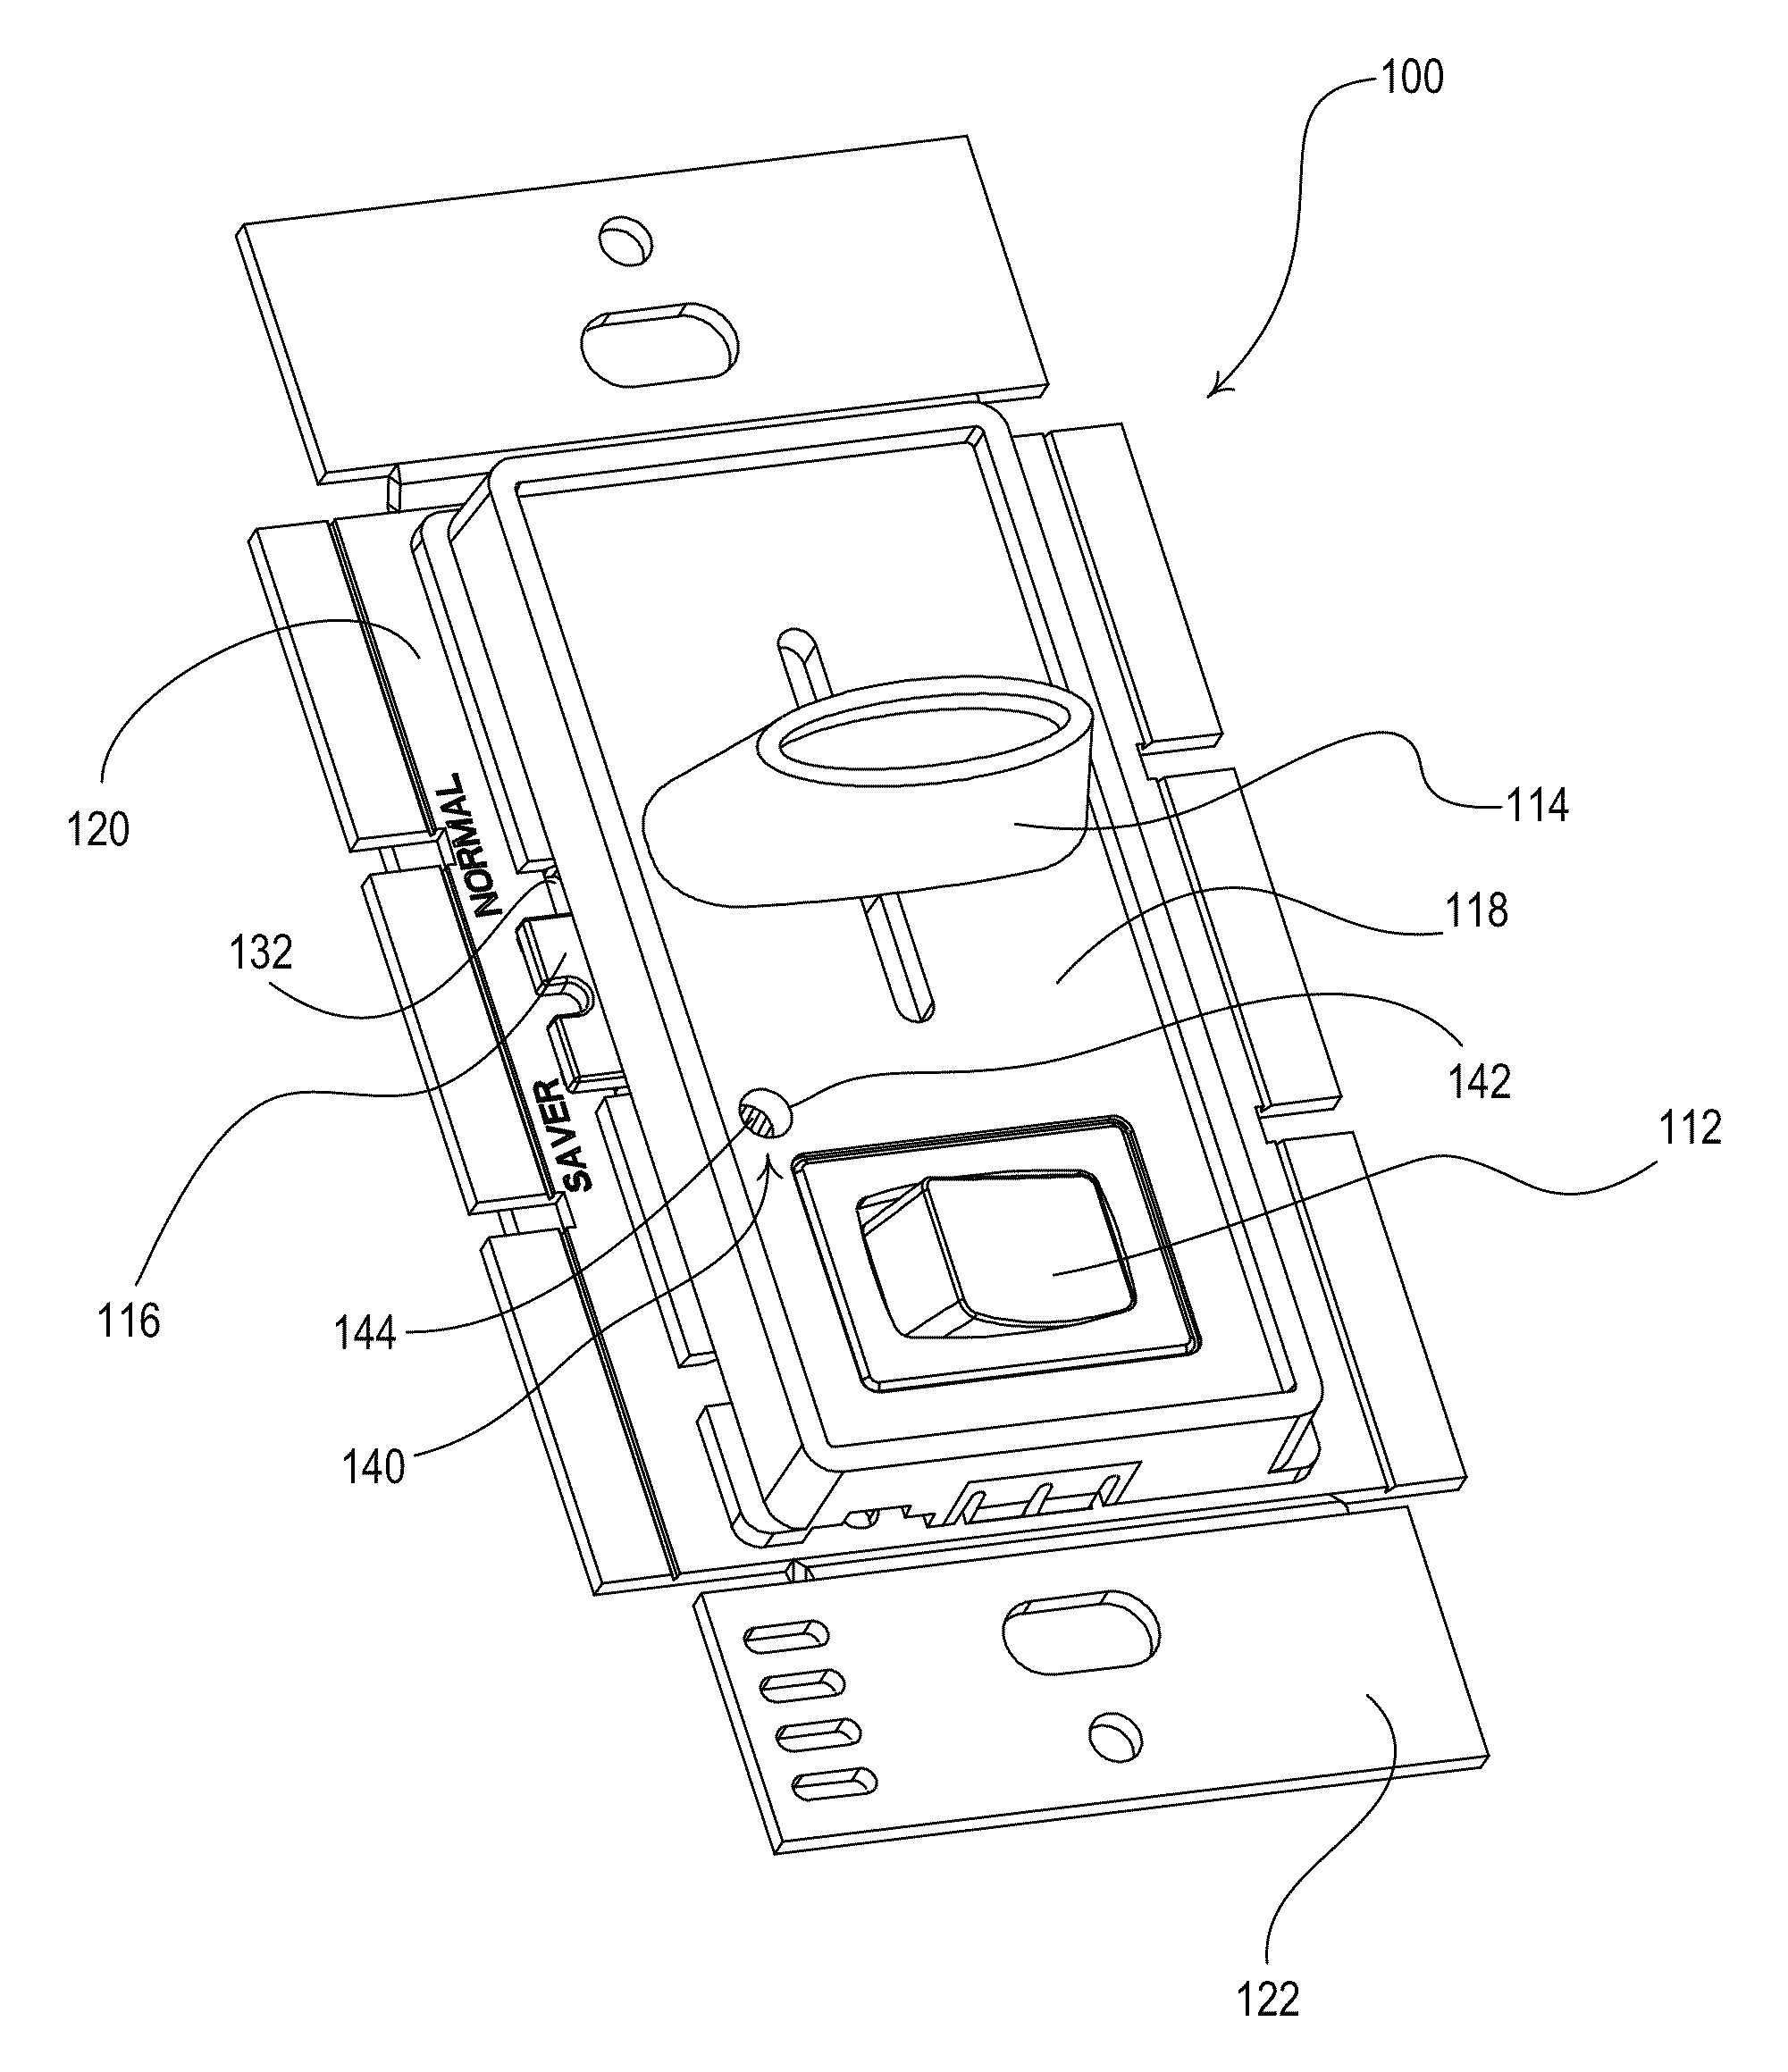 Load Control Device Having a Visual Indication of an Energy Savings Mode